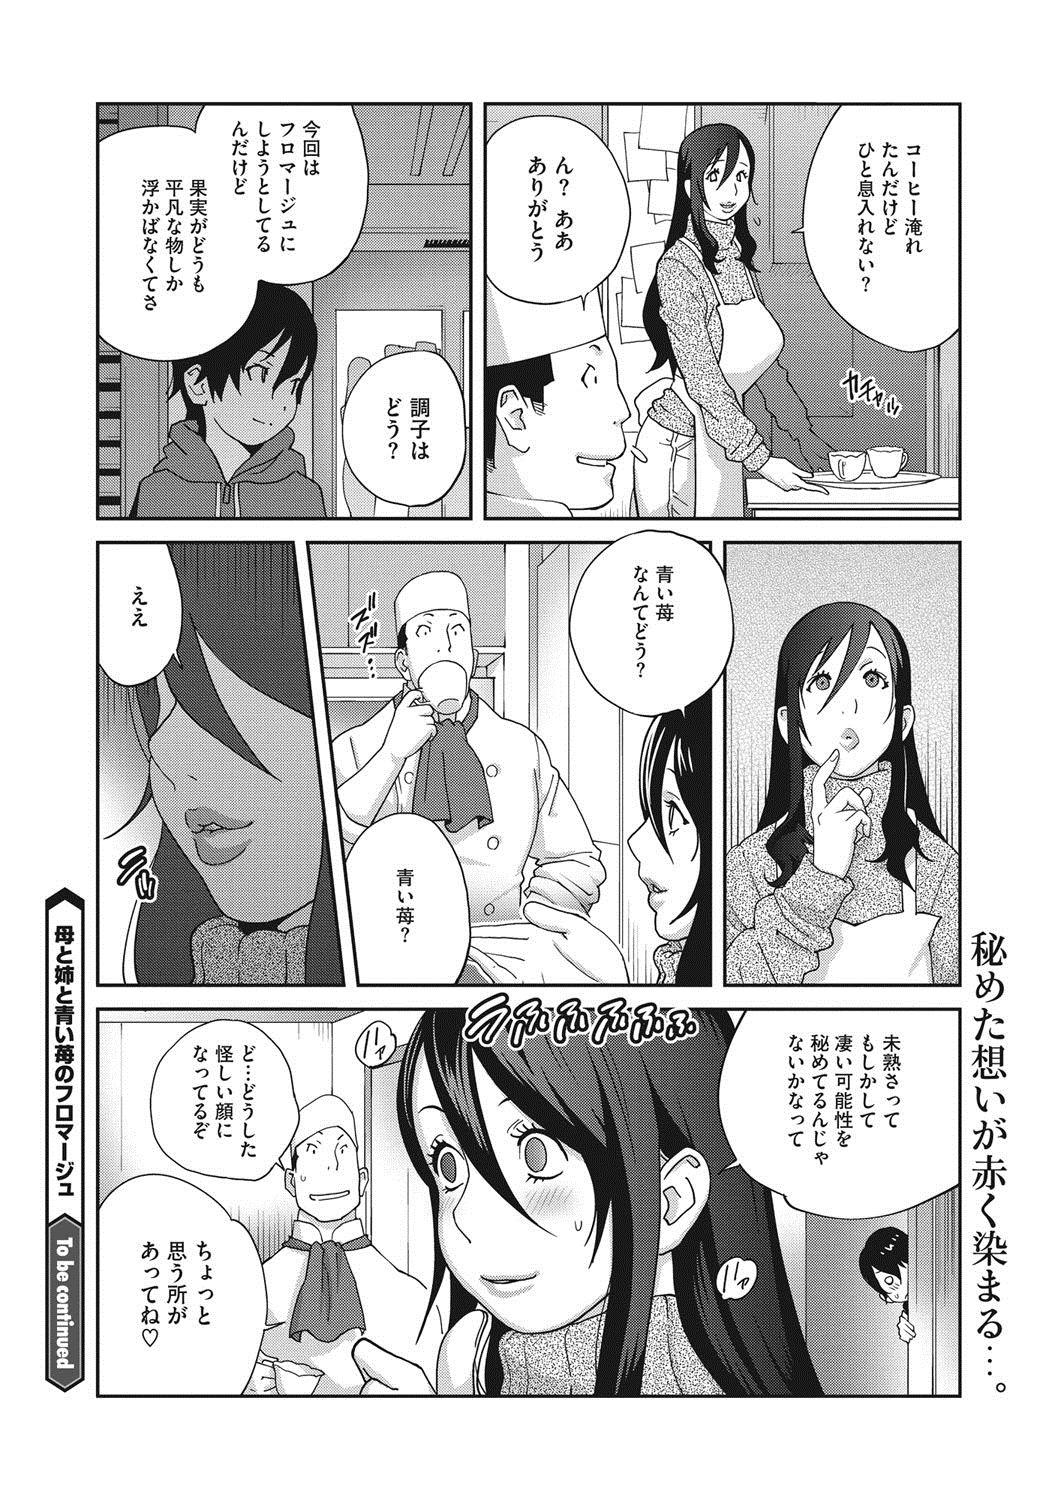 [Kotoyoshi Yumisuke] Haha to Ane to Aoi Ichigo no Fromage - Fromage of mother and an older sister and a blue strawberry Ch. 1-4 79